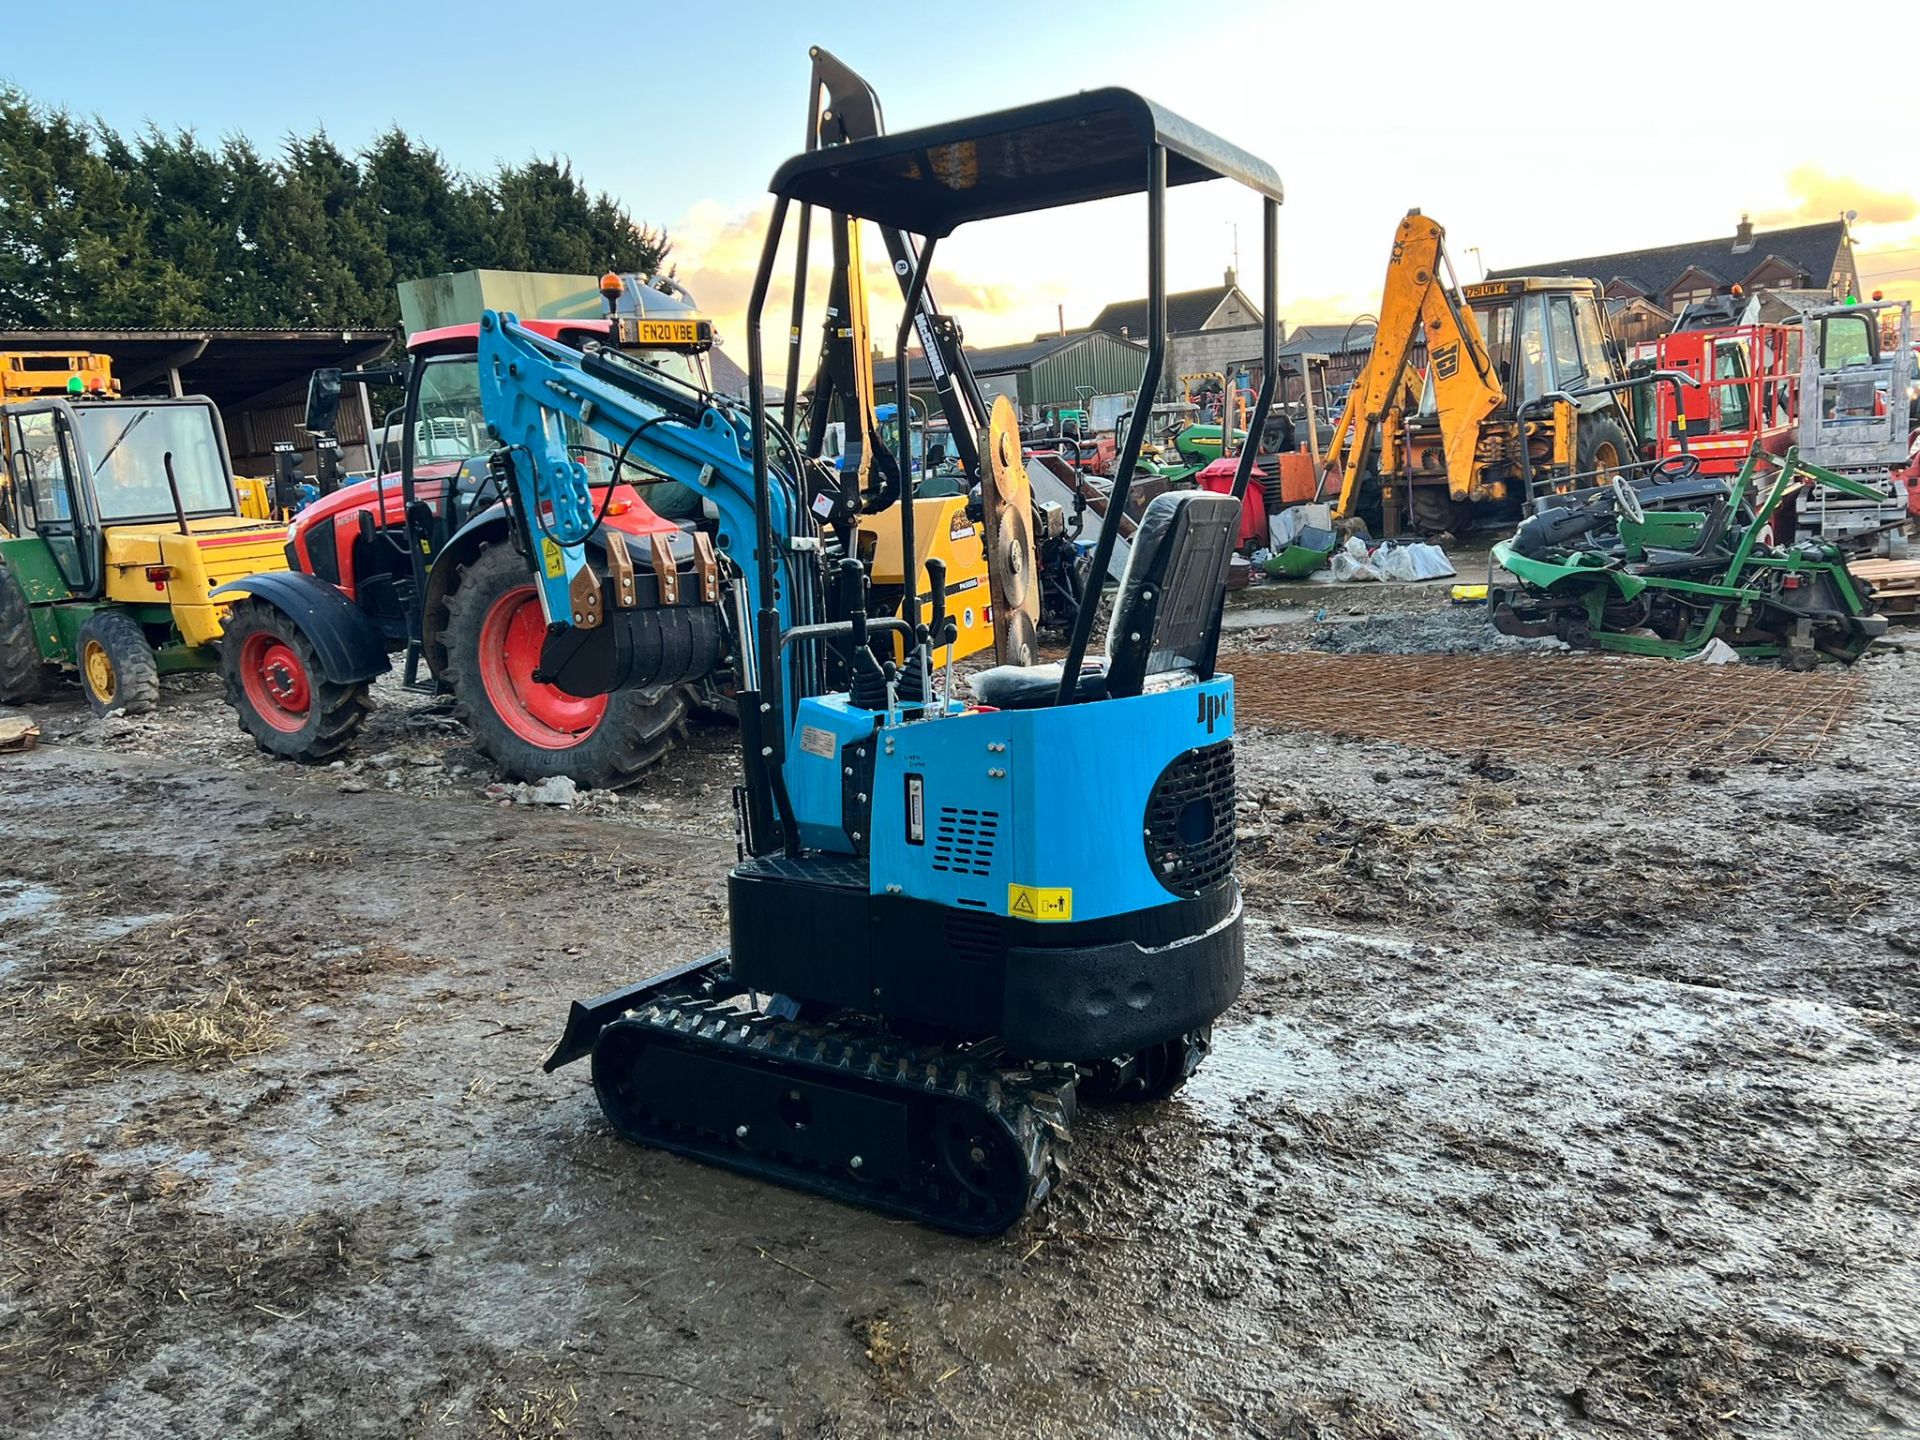 UNUSED JPC HT12 1 TON MINI DIGGER, RUNS DRIVES AND DIGS, PIPED FOR FRONT ATTACHMENTS - Image 5 of 11